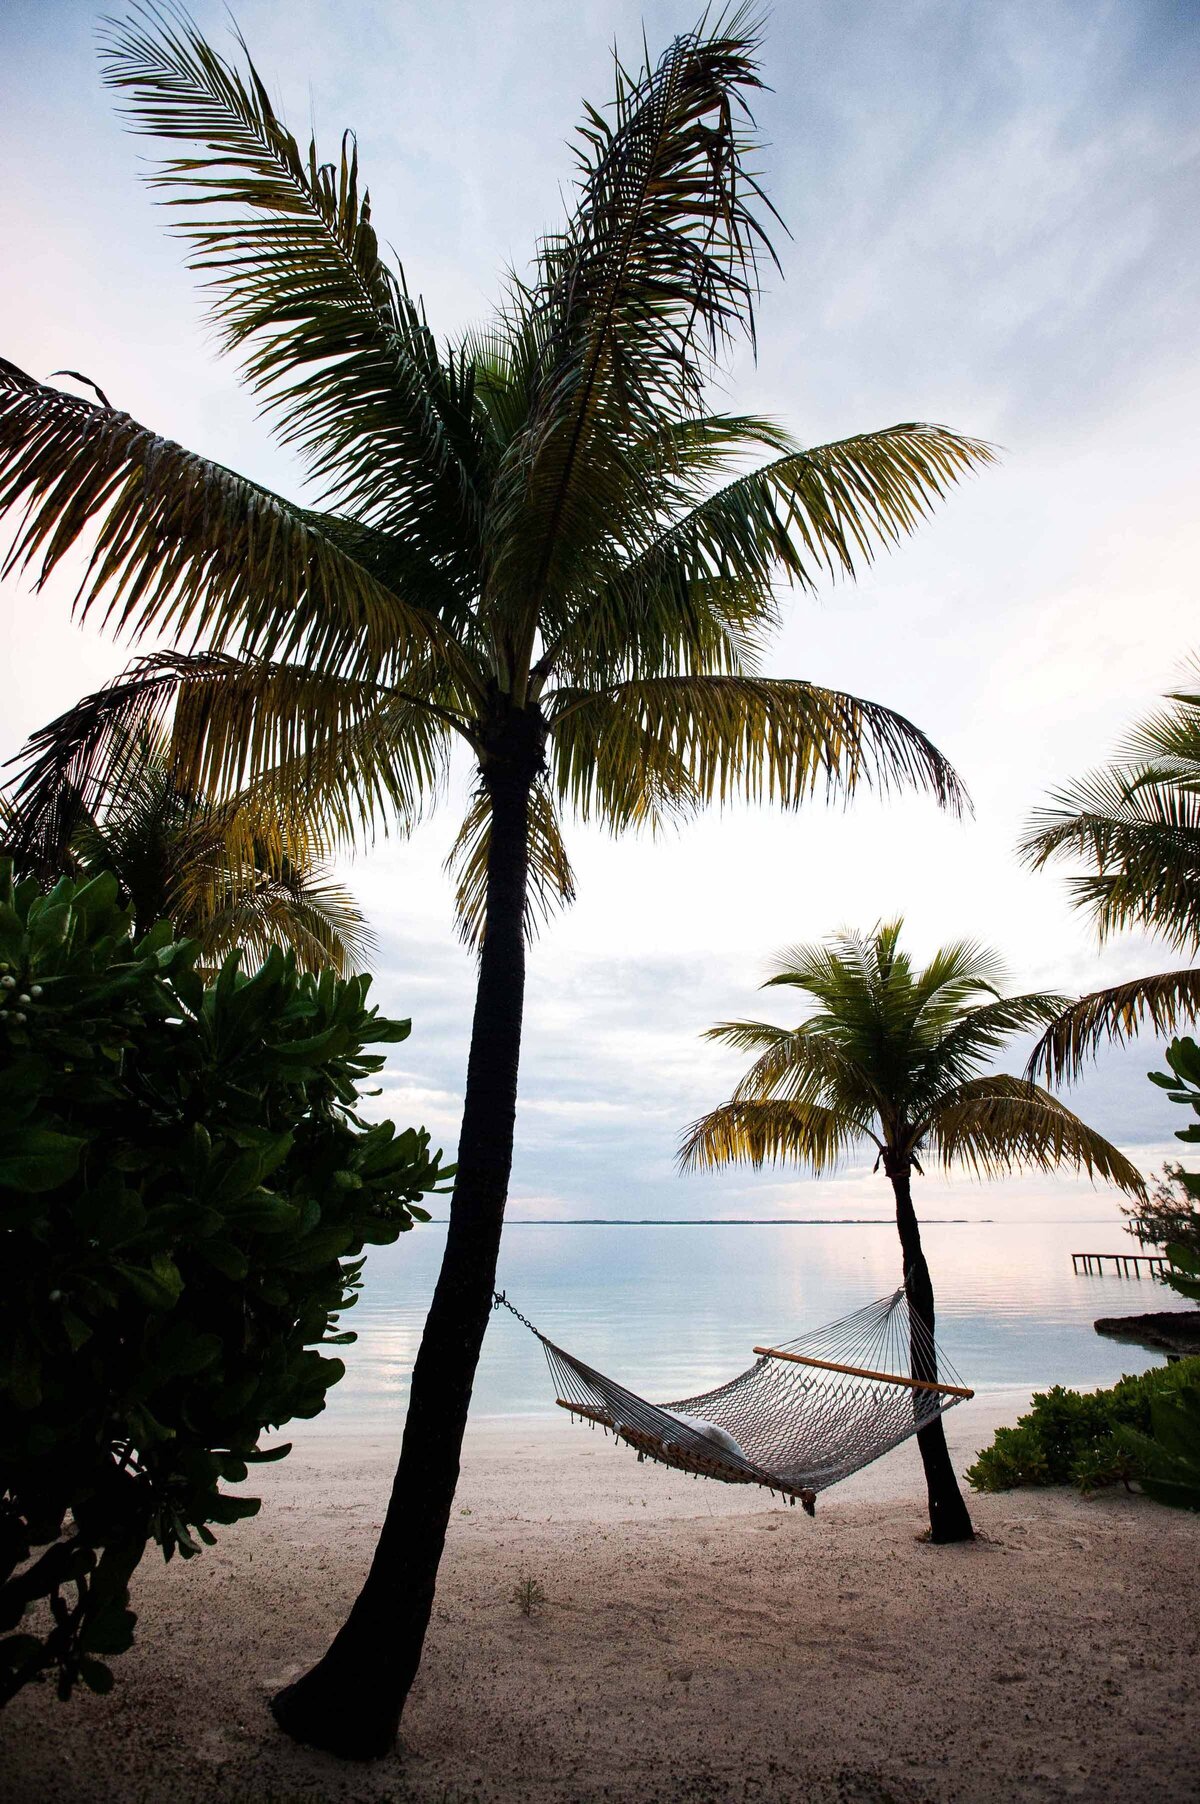 A Hammock hangs between two palm trees on Harbour Island Bahamas in the afternoon near the calm water